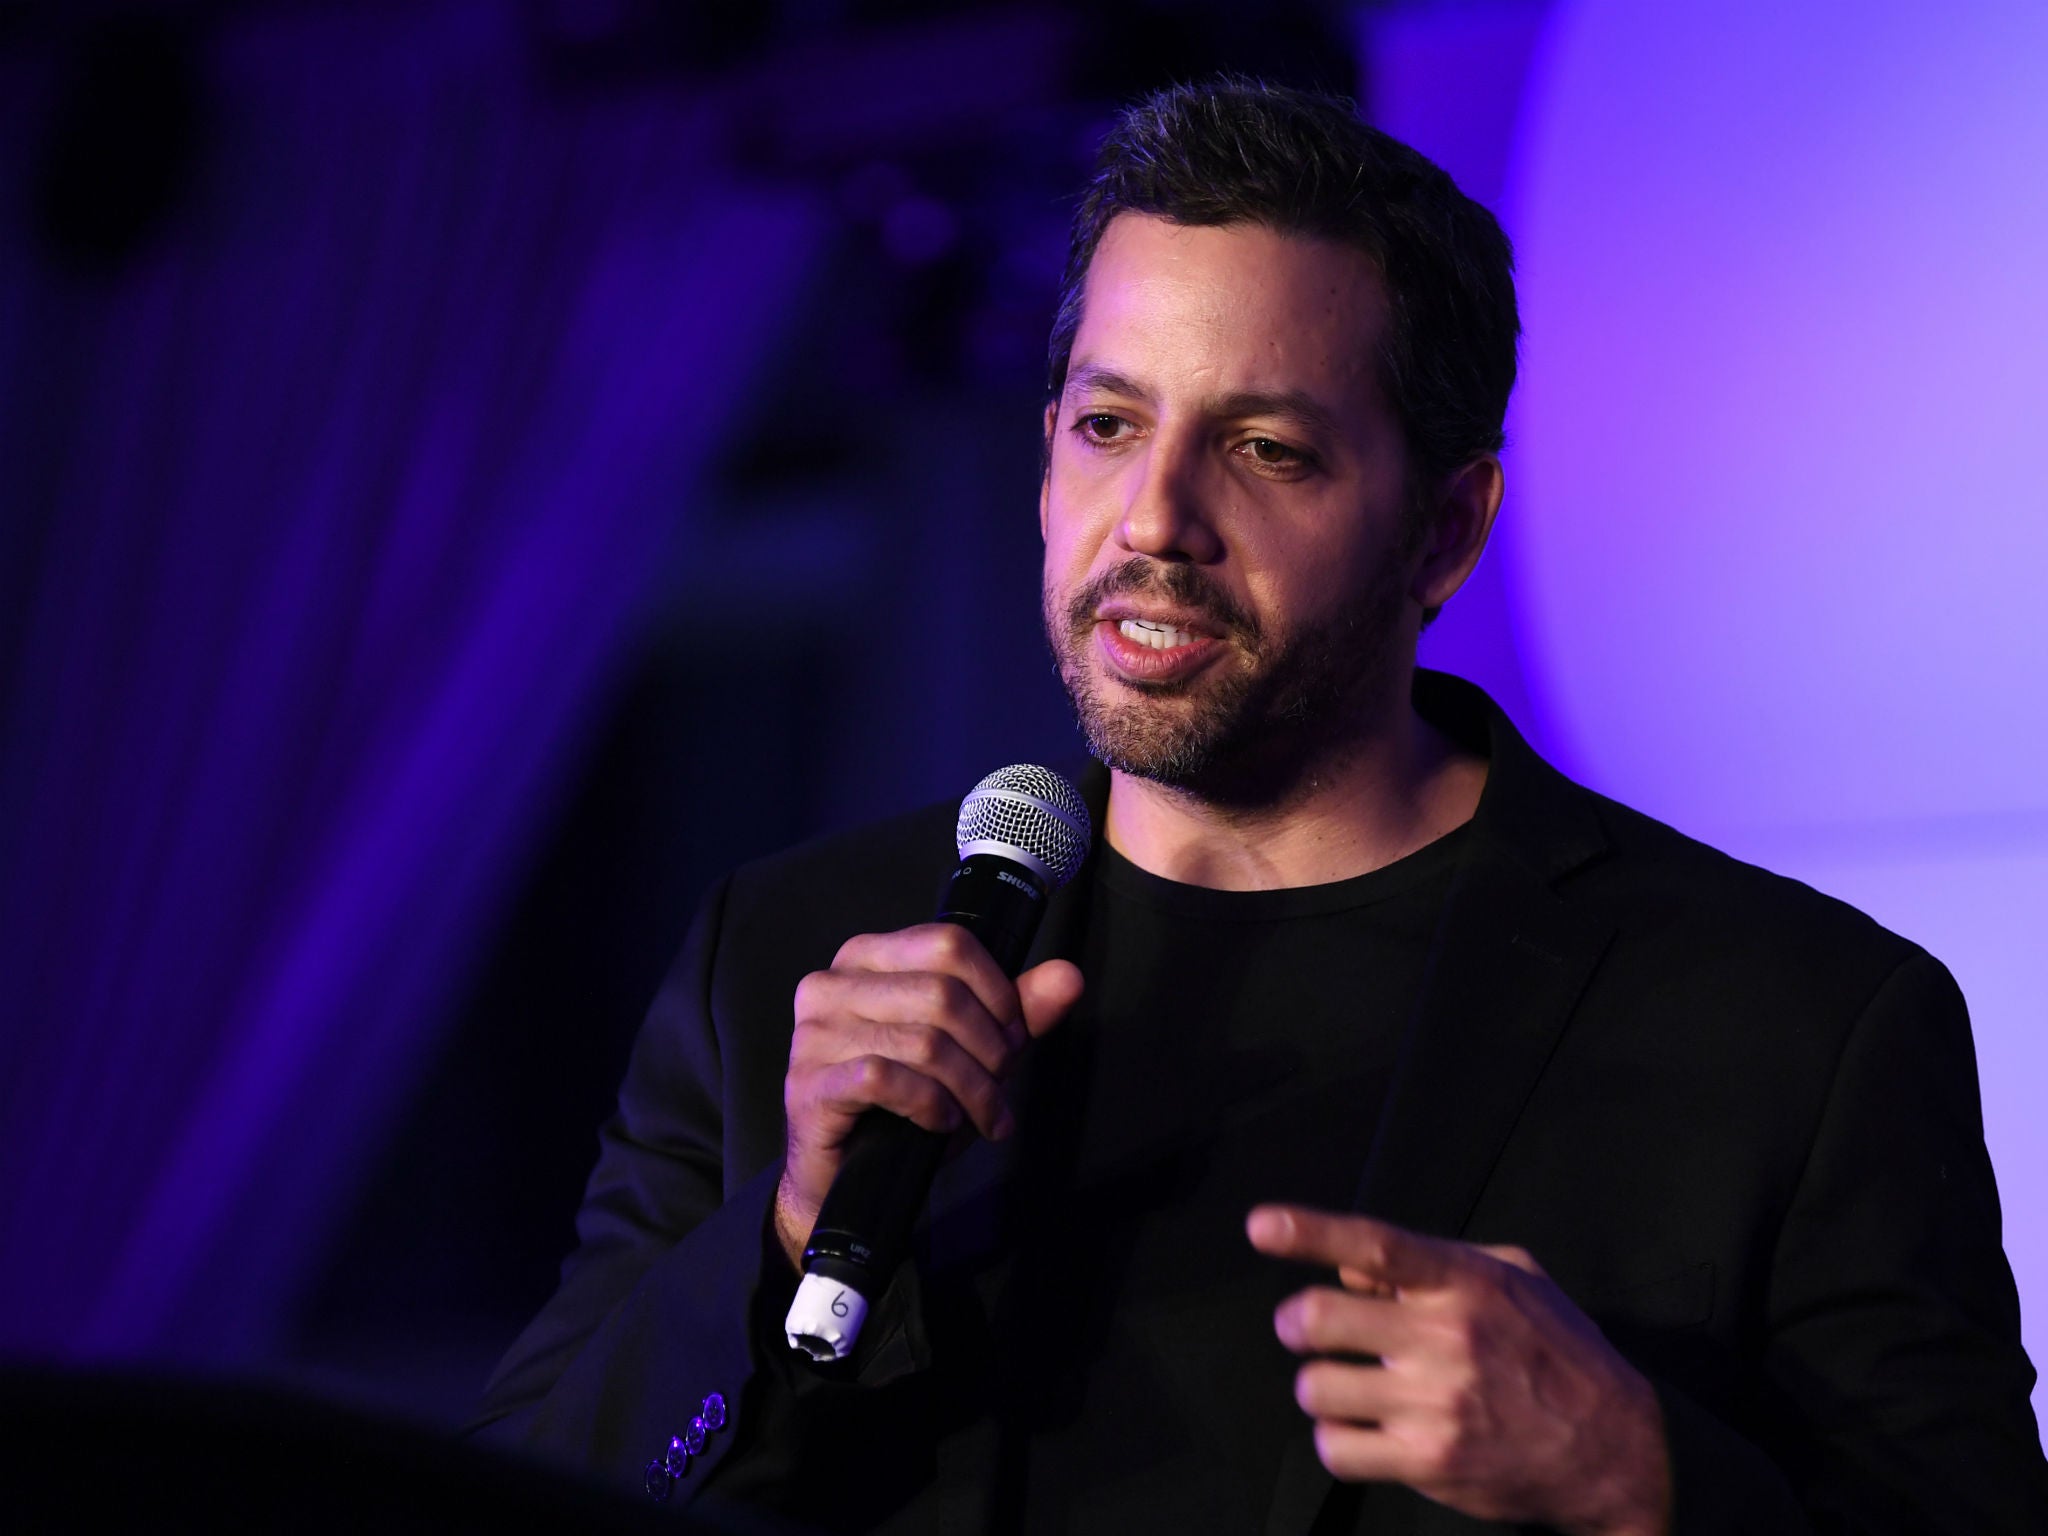 Magician David Blaine speaks during at Liberty Science Center on May 5, 2017 in Jersey City, New Jersey